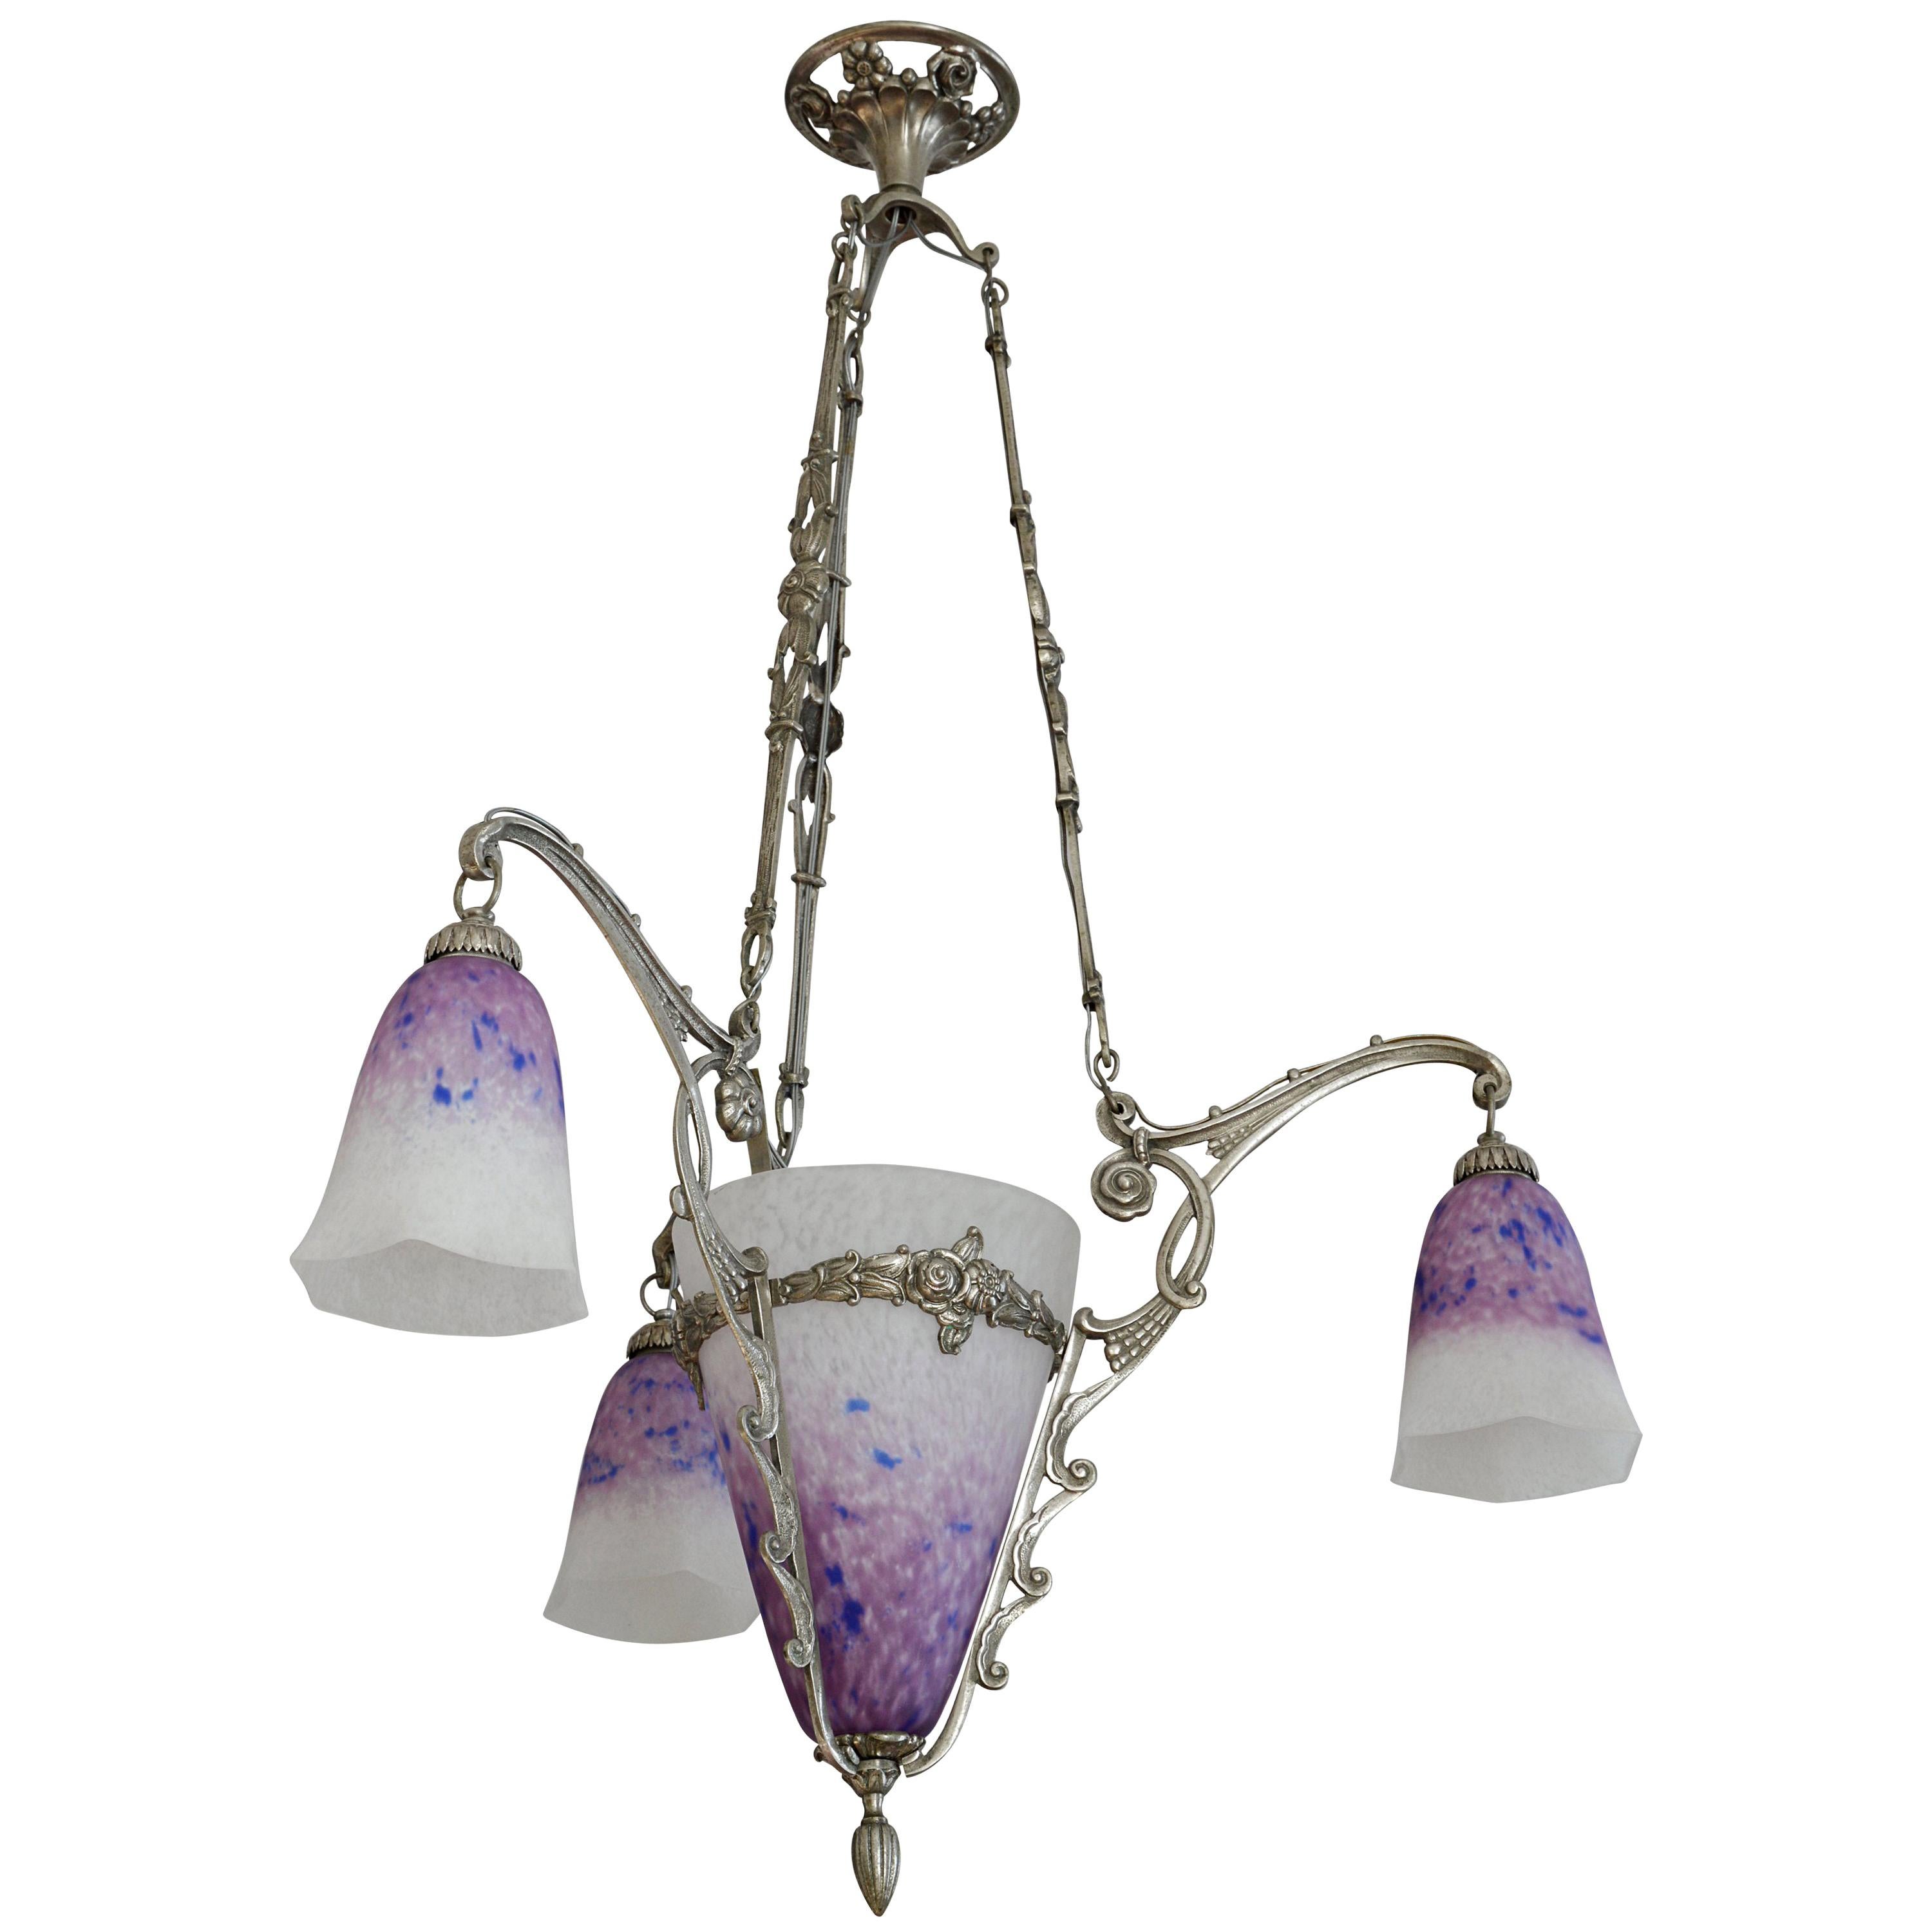 Charles Schneider and Charles Ranc French Art Deco Chandelier, 1924-1928